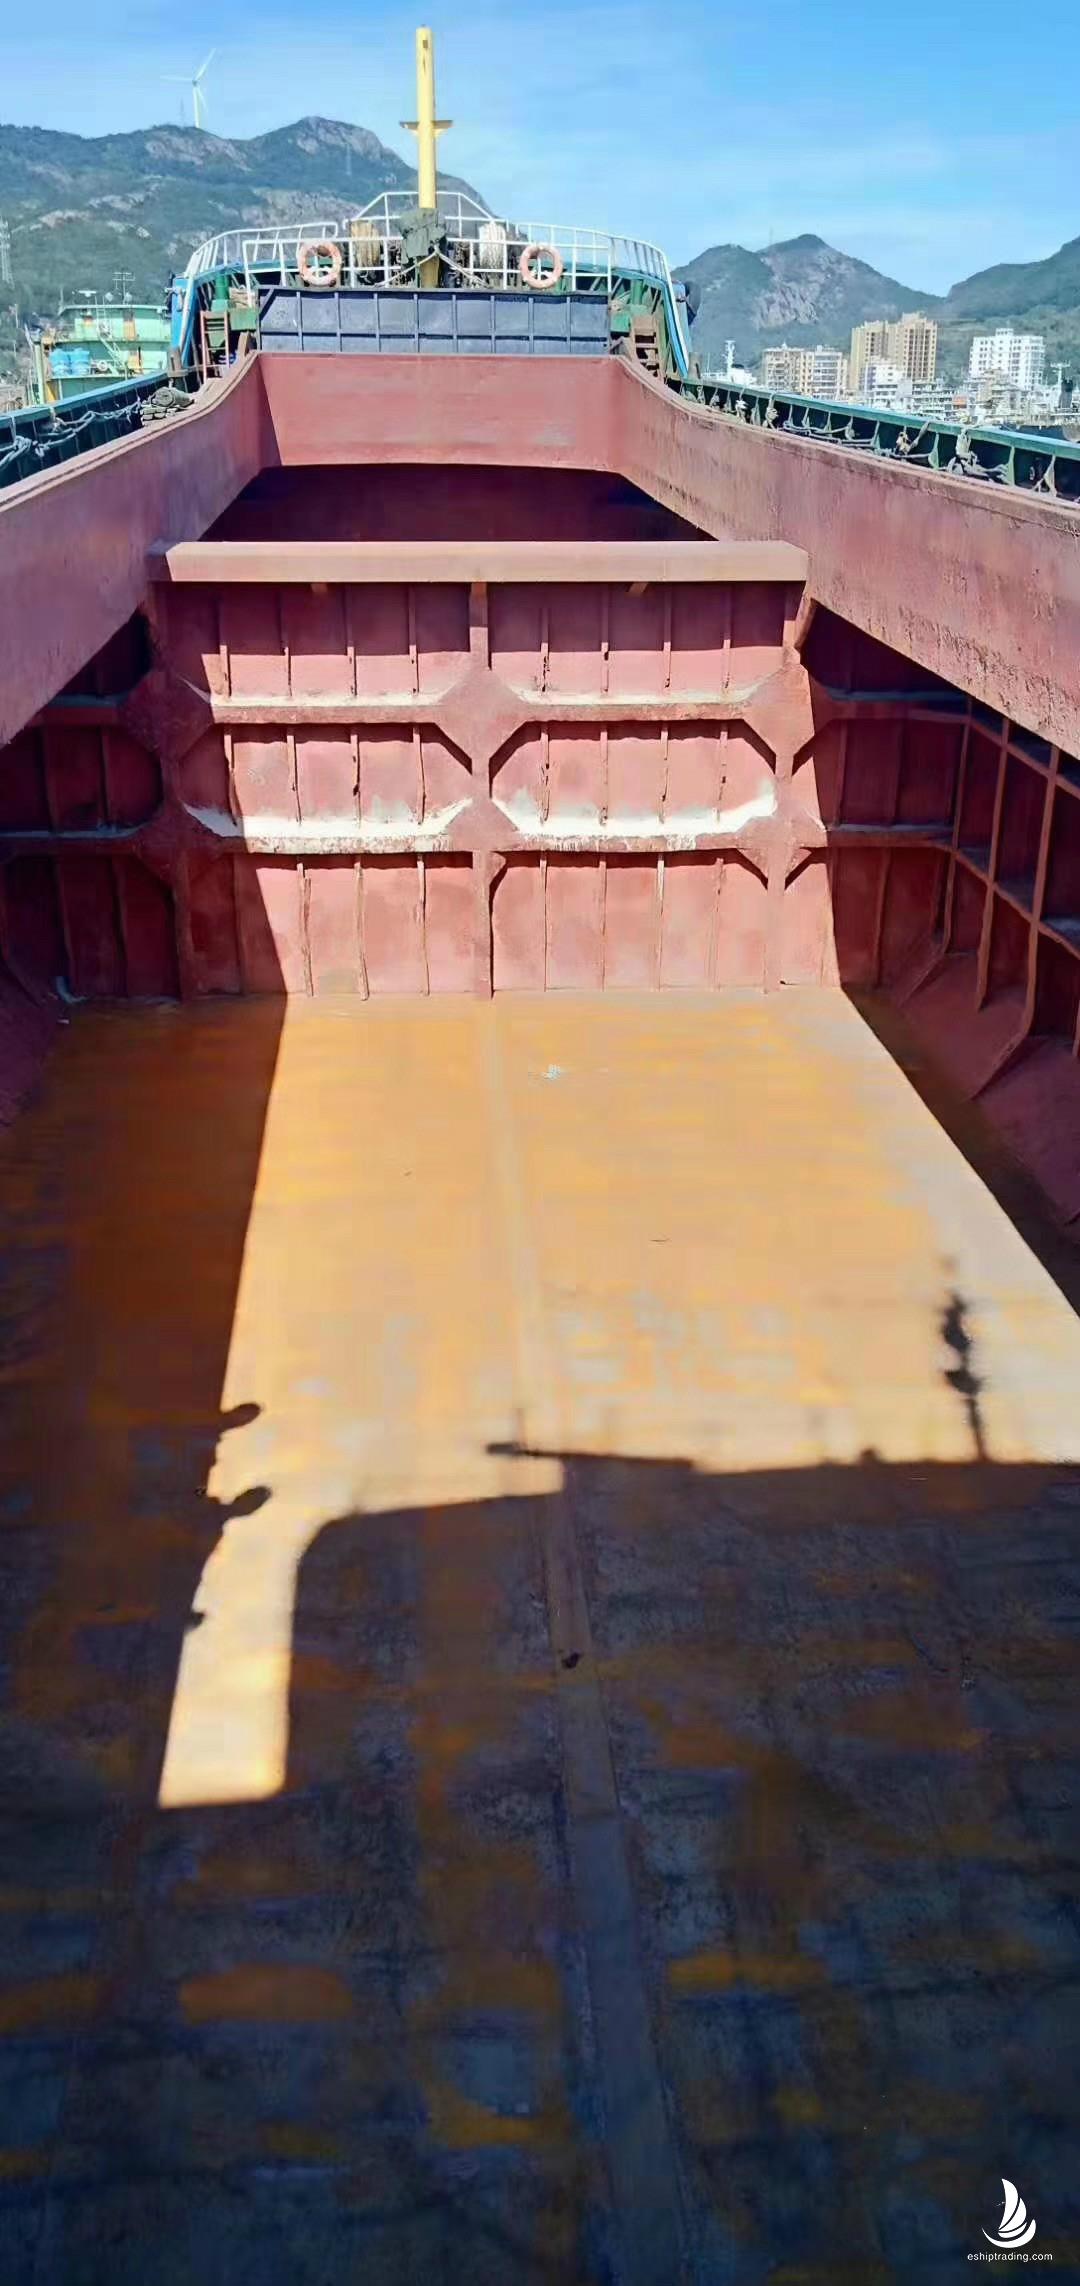 932 T Dry Cargo Ship For Sale